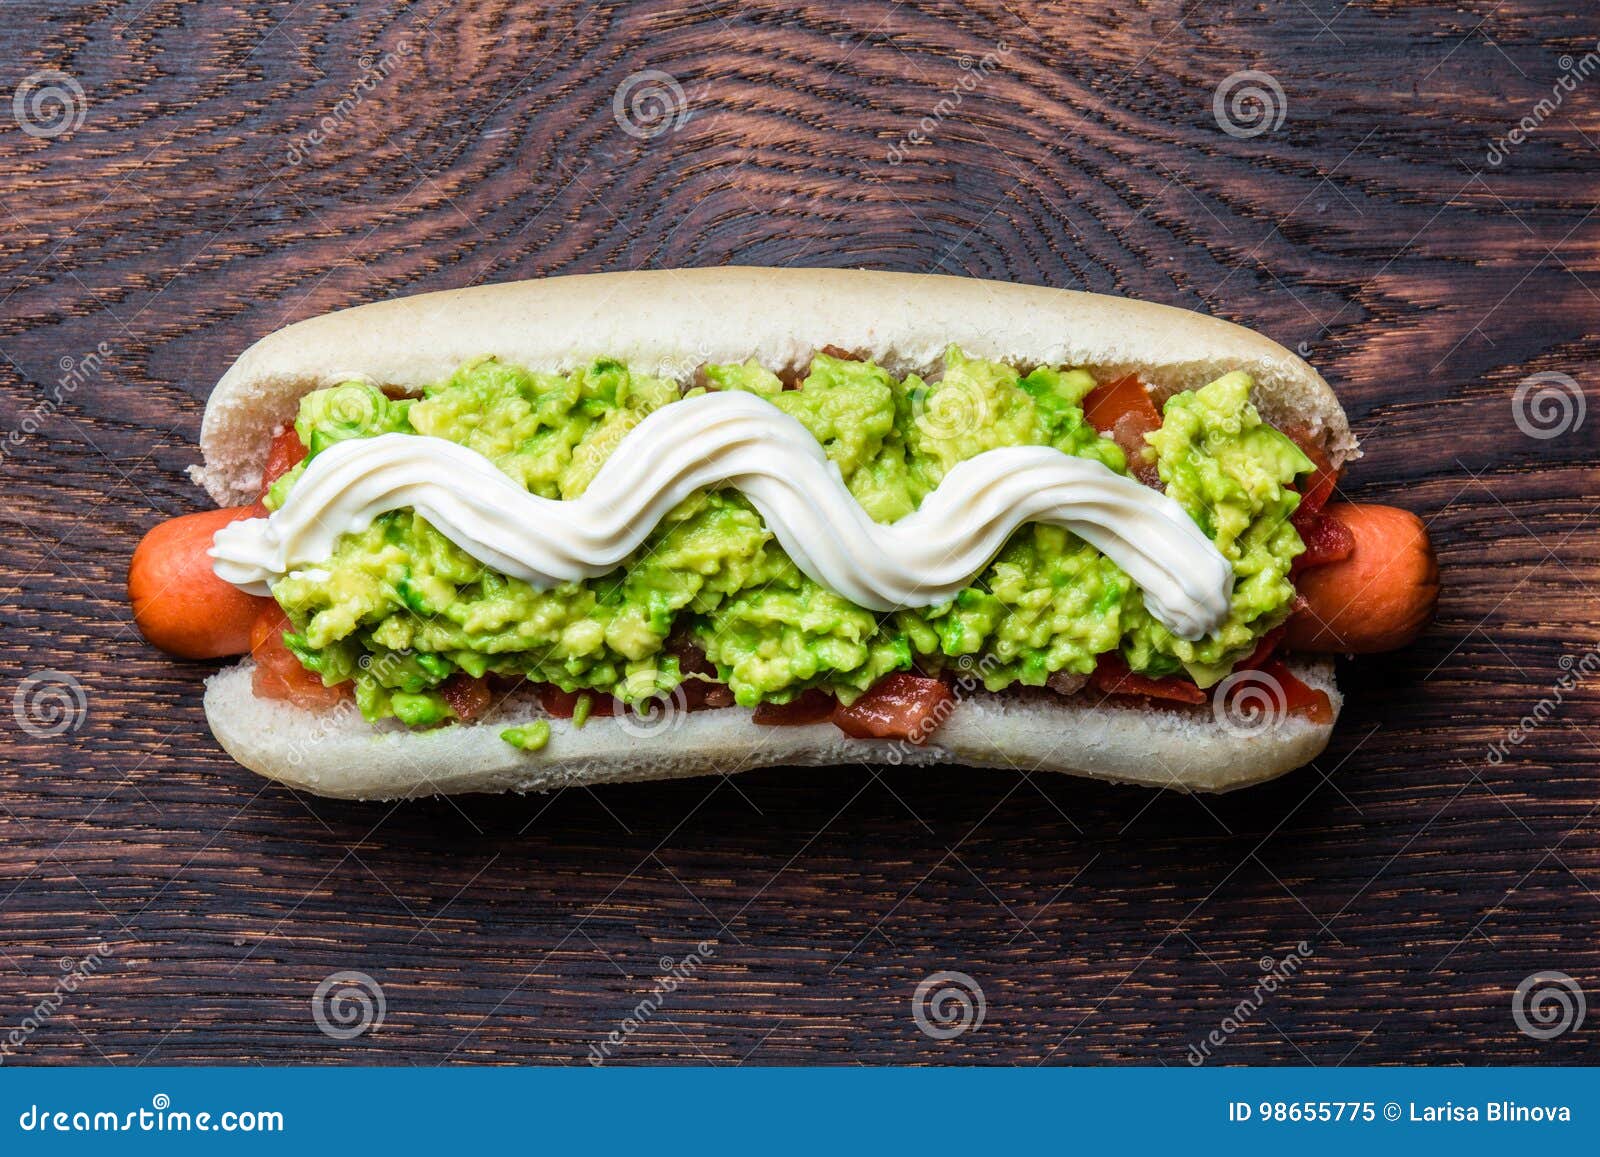 chilean completo italiano. hot dog sandwiches with tomato, avocado and mayonnaise on wooden board. top view, copy space